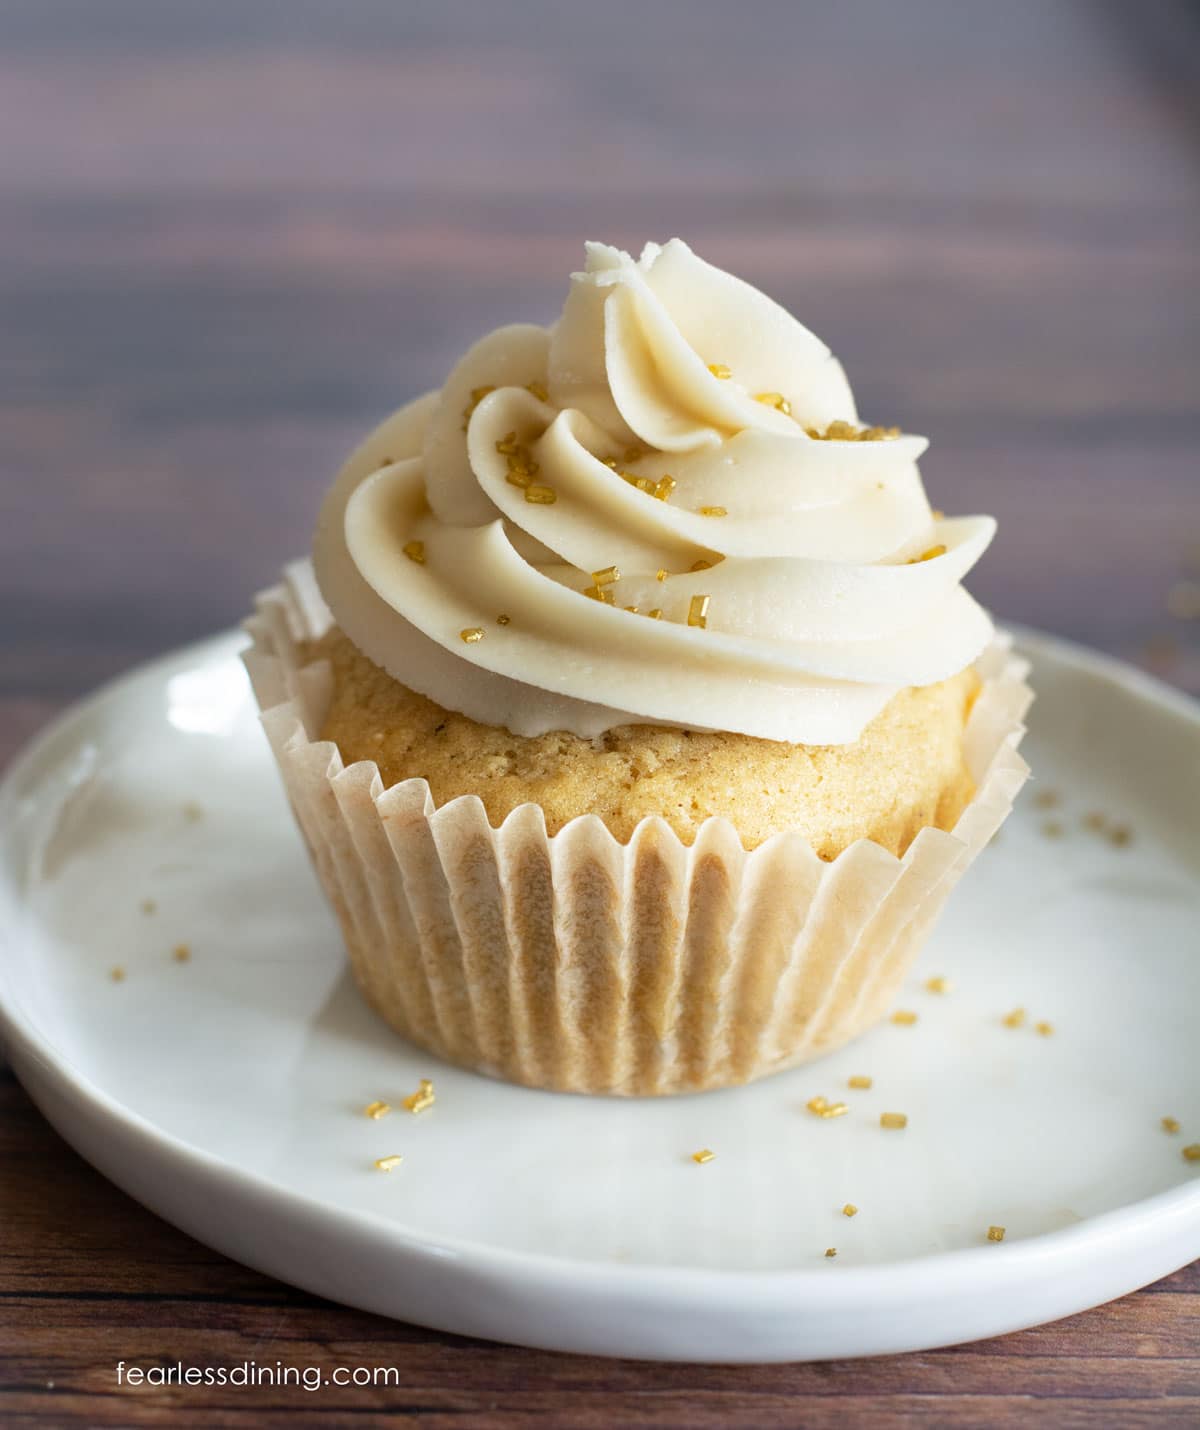 A single frosted cupcake on a small white plate.